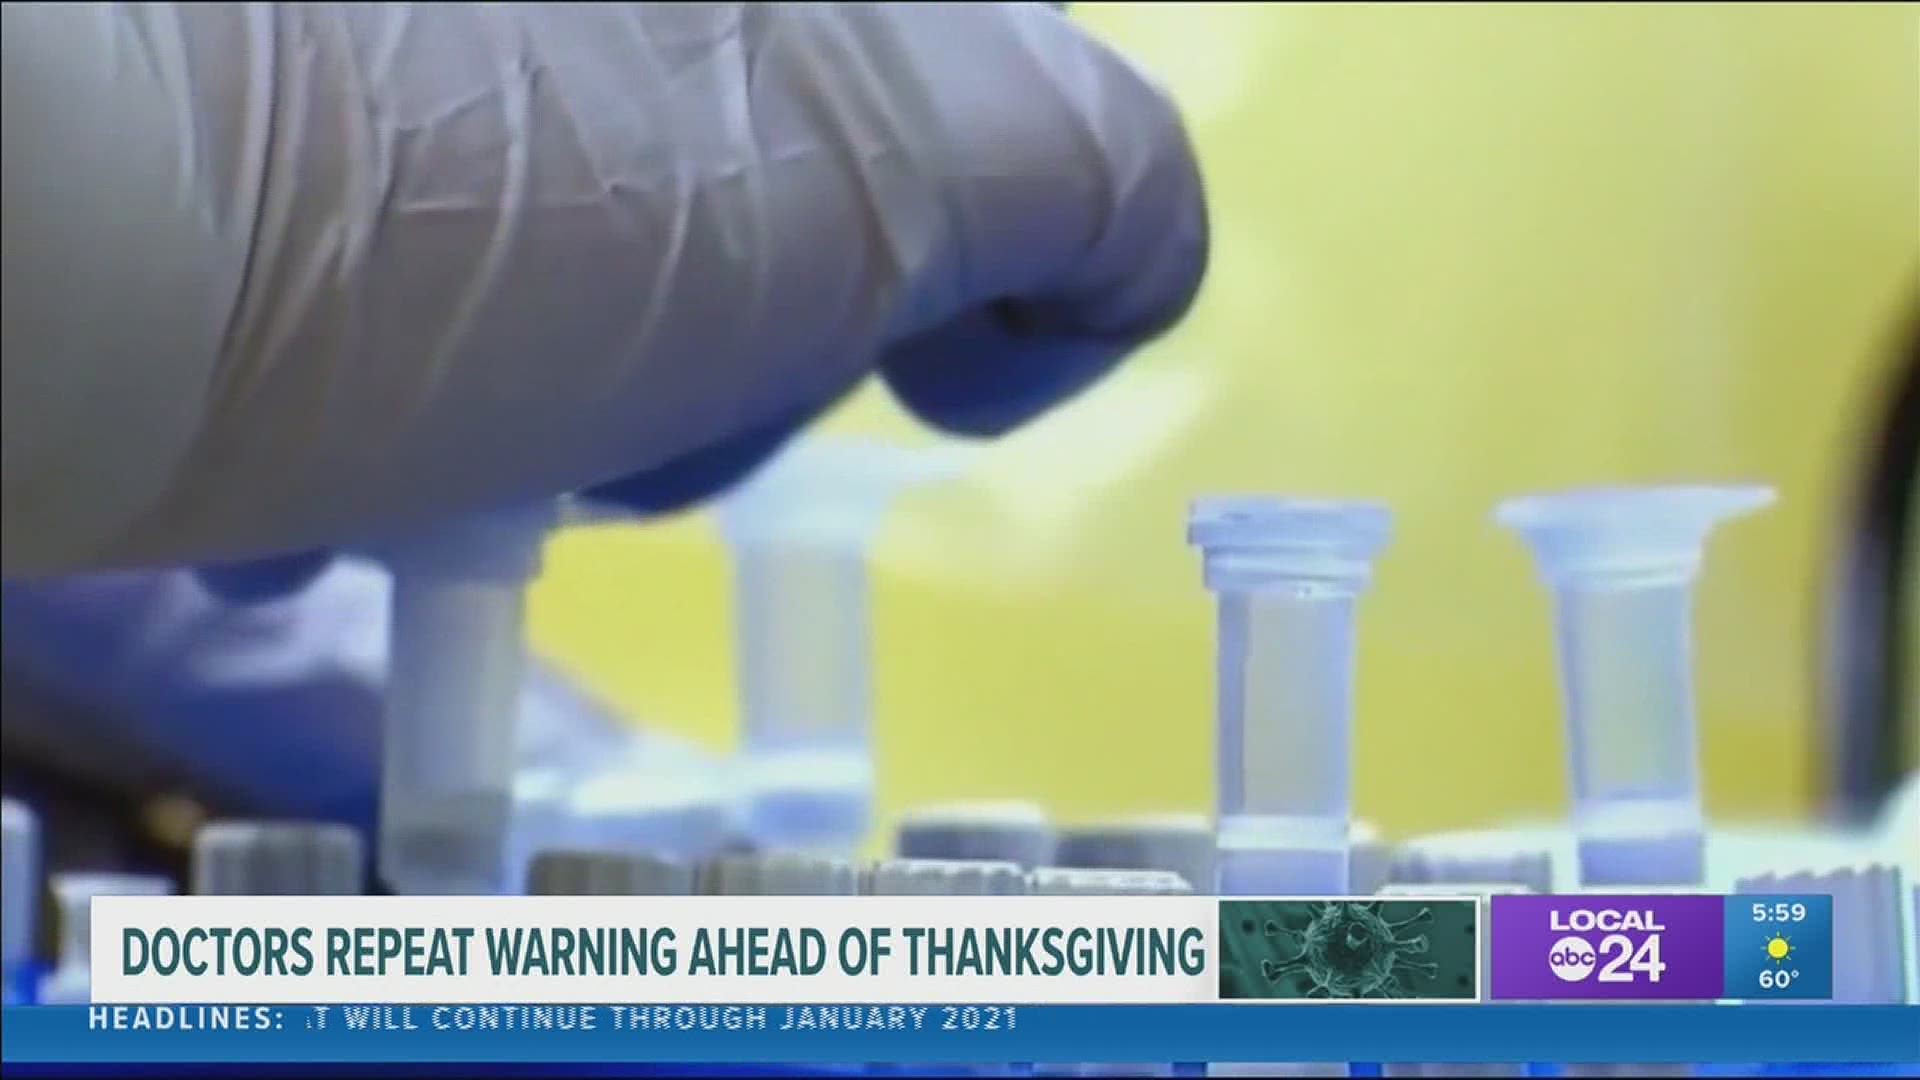 Monday's new one-day reported cases nearly broke a pandemic record, increasing worry about more spread at upcoming Thanksgiving gatherings.